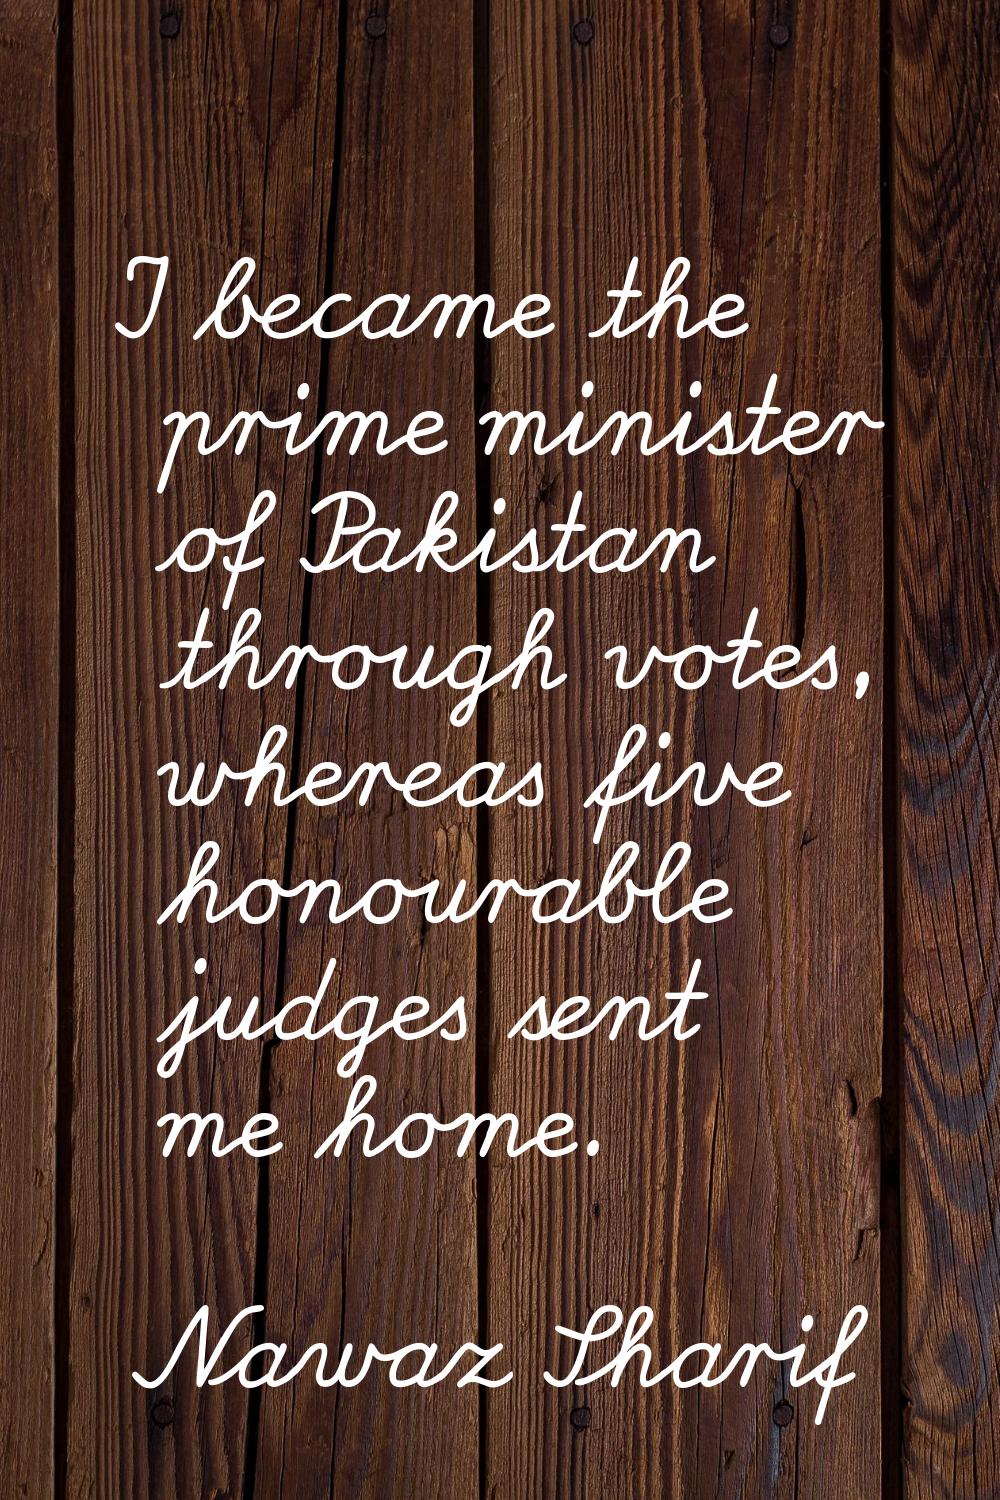 I became the prime minister of Pakistan through votes, whereas five honourable judges sent me home.